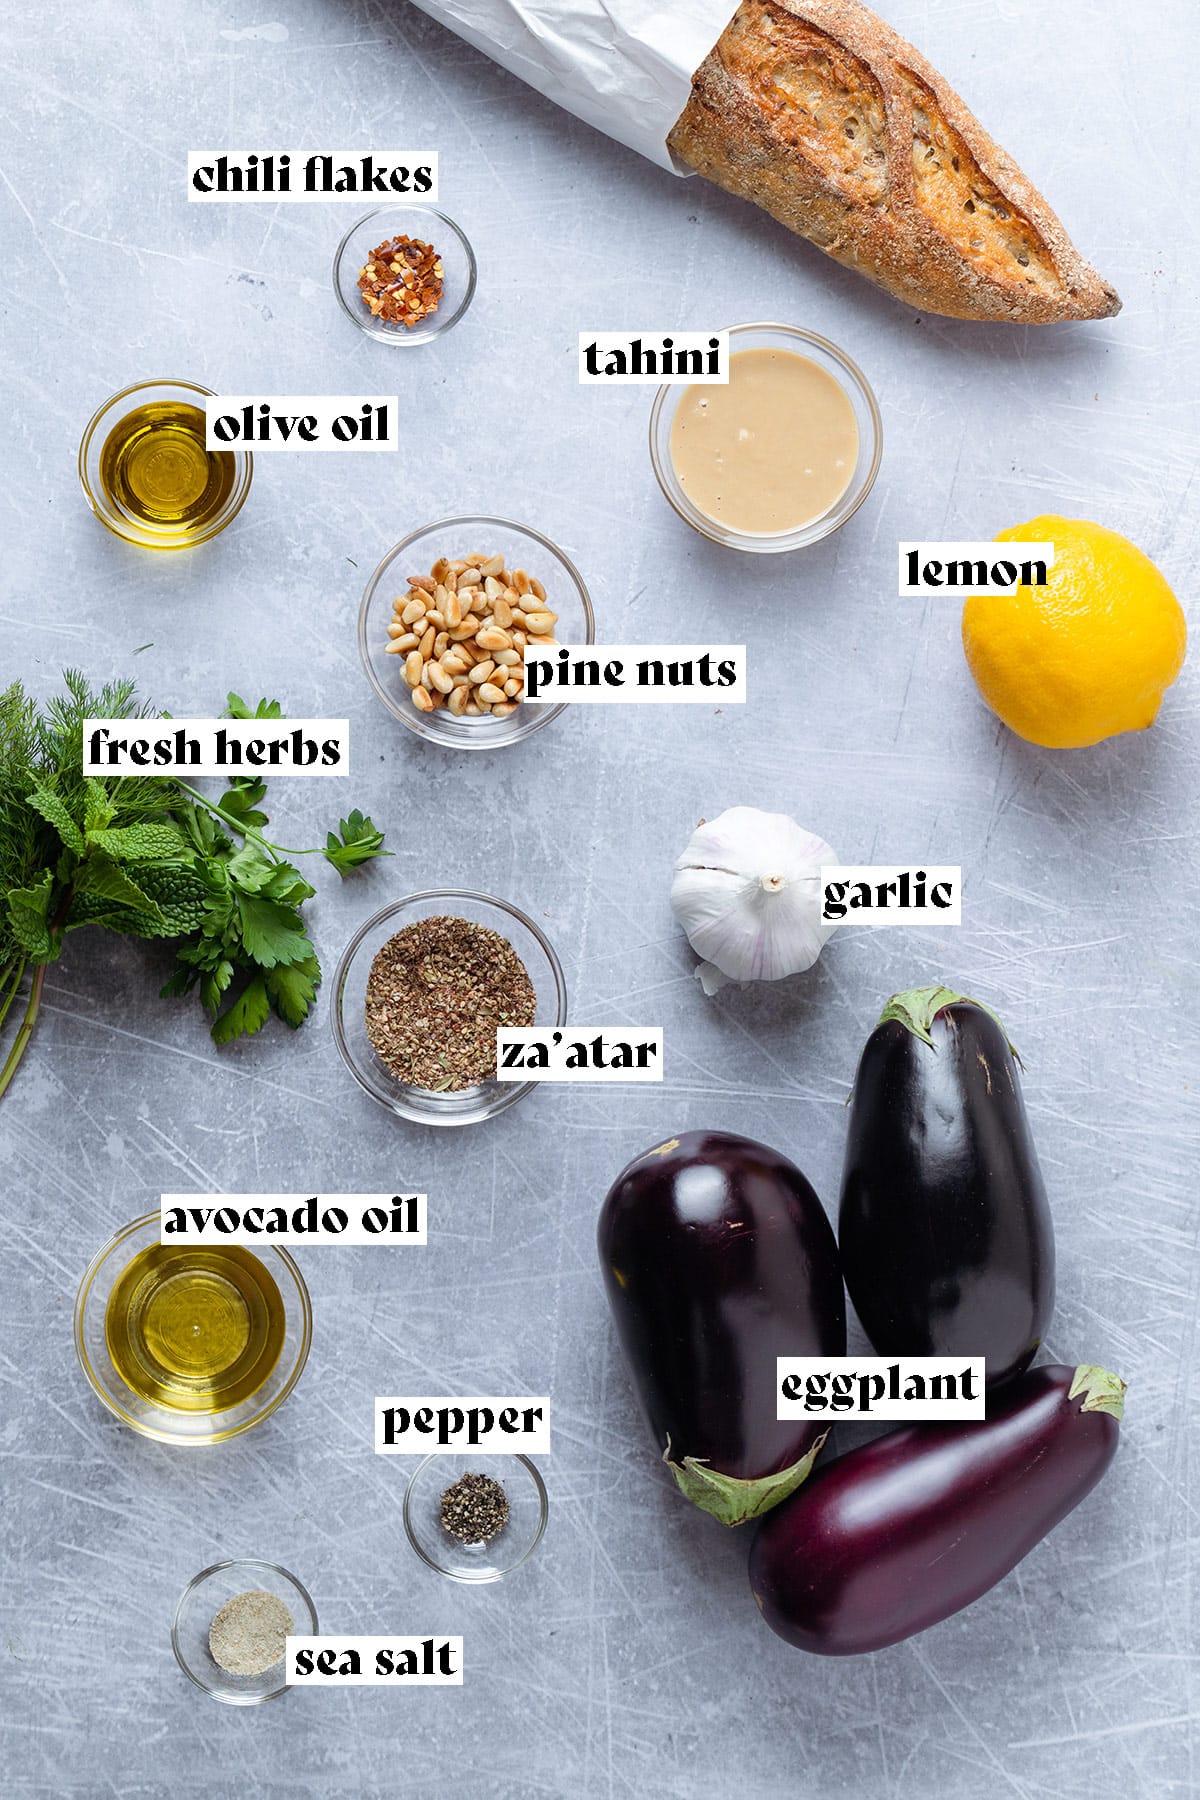 Ingredients like eggplant, pine nuts, tahini, herbs, lemon all laid out on a grey background.